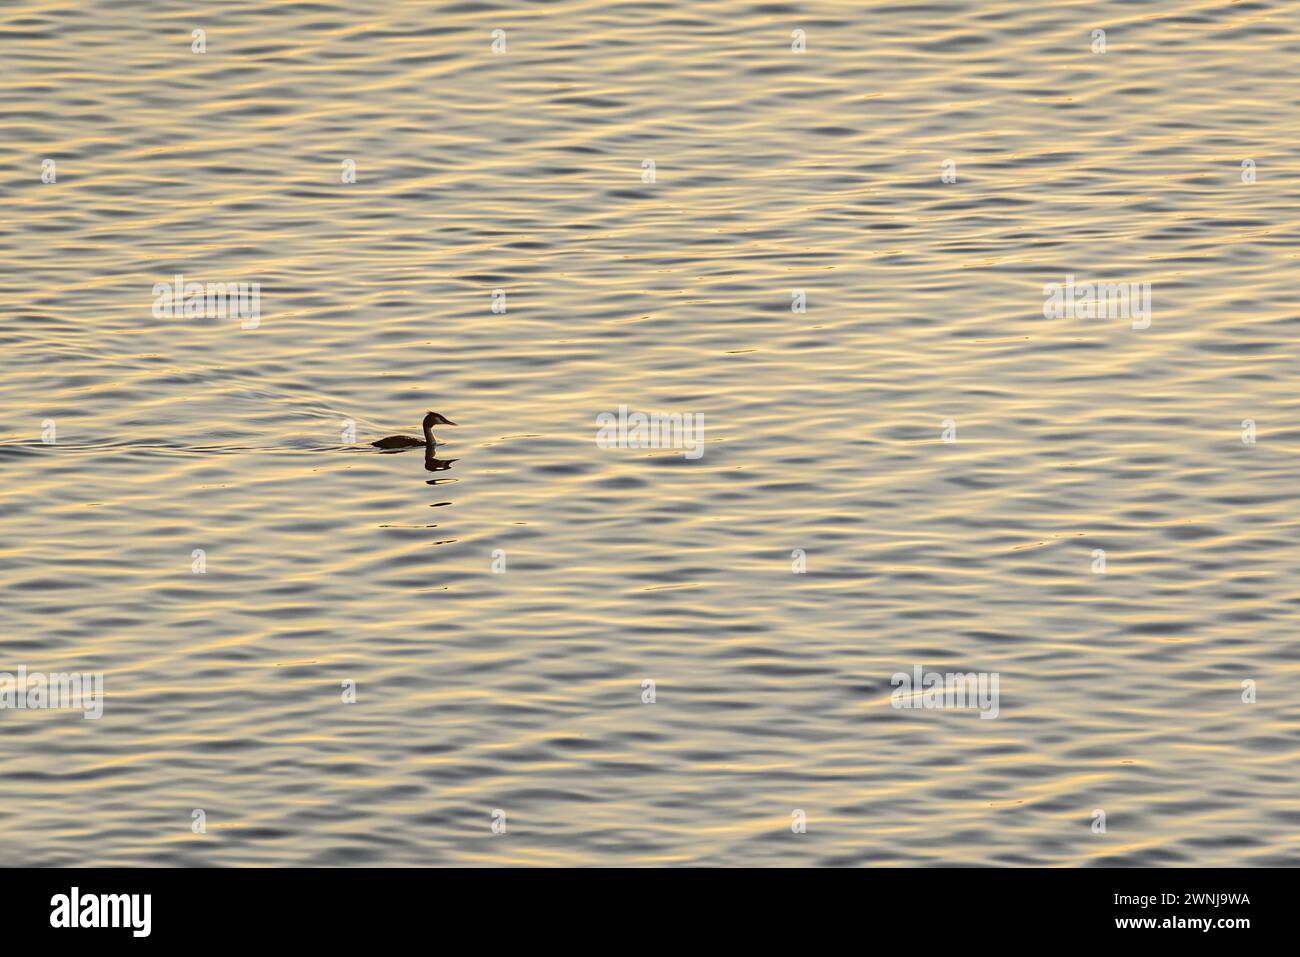 A cormorant at sunrise on the Ebro river seen from the Zigurat viewpoint, at the mouth of the Ebro River (Tarragona, Catalonia, Spain) Stock Photo